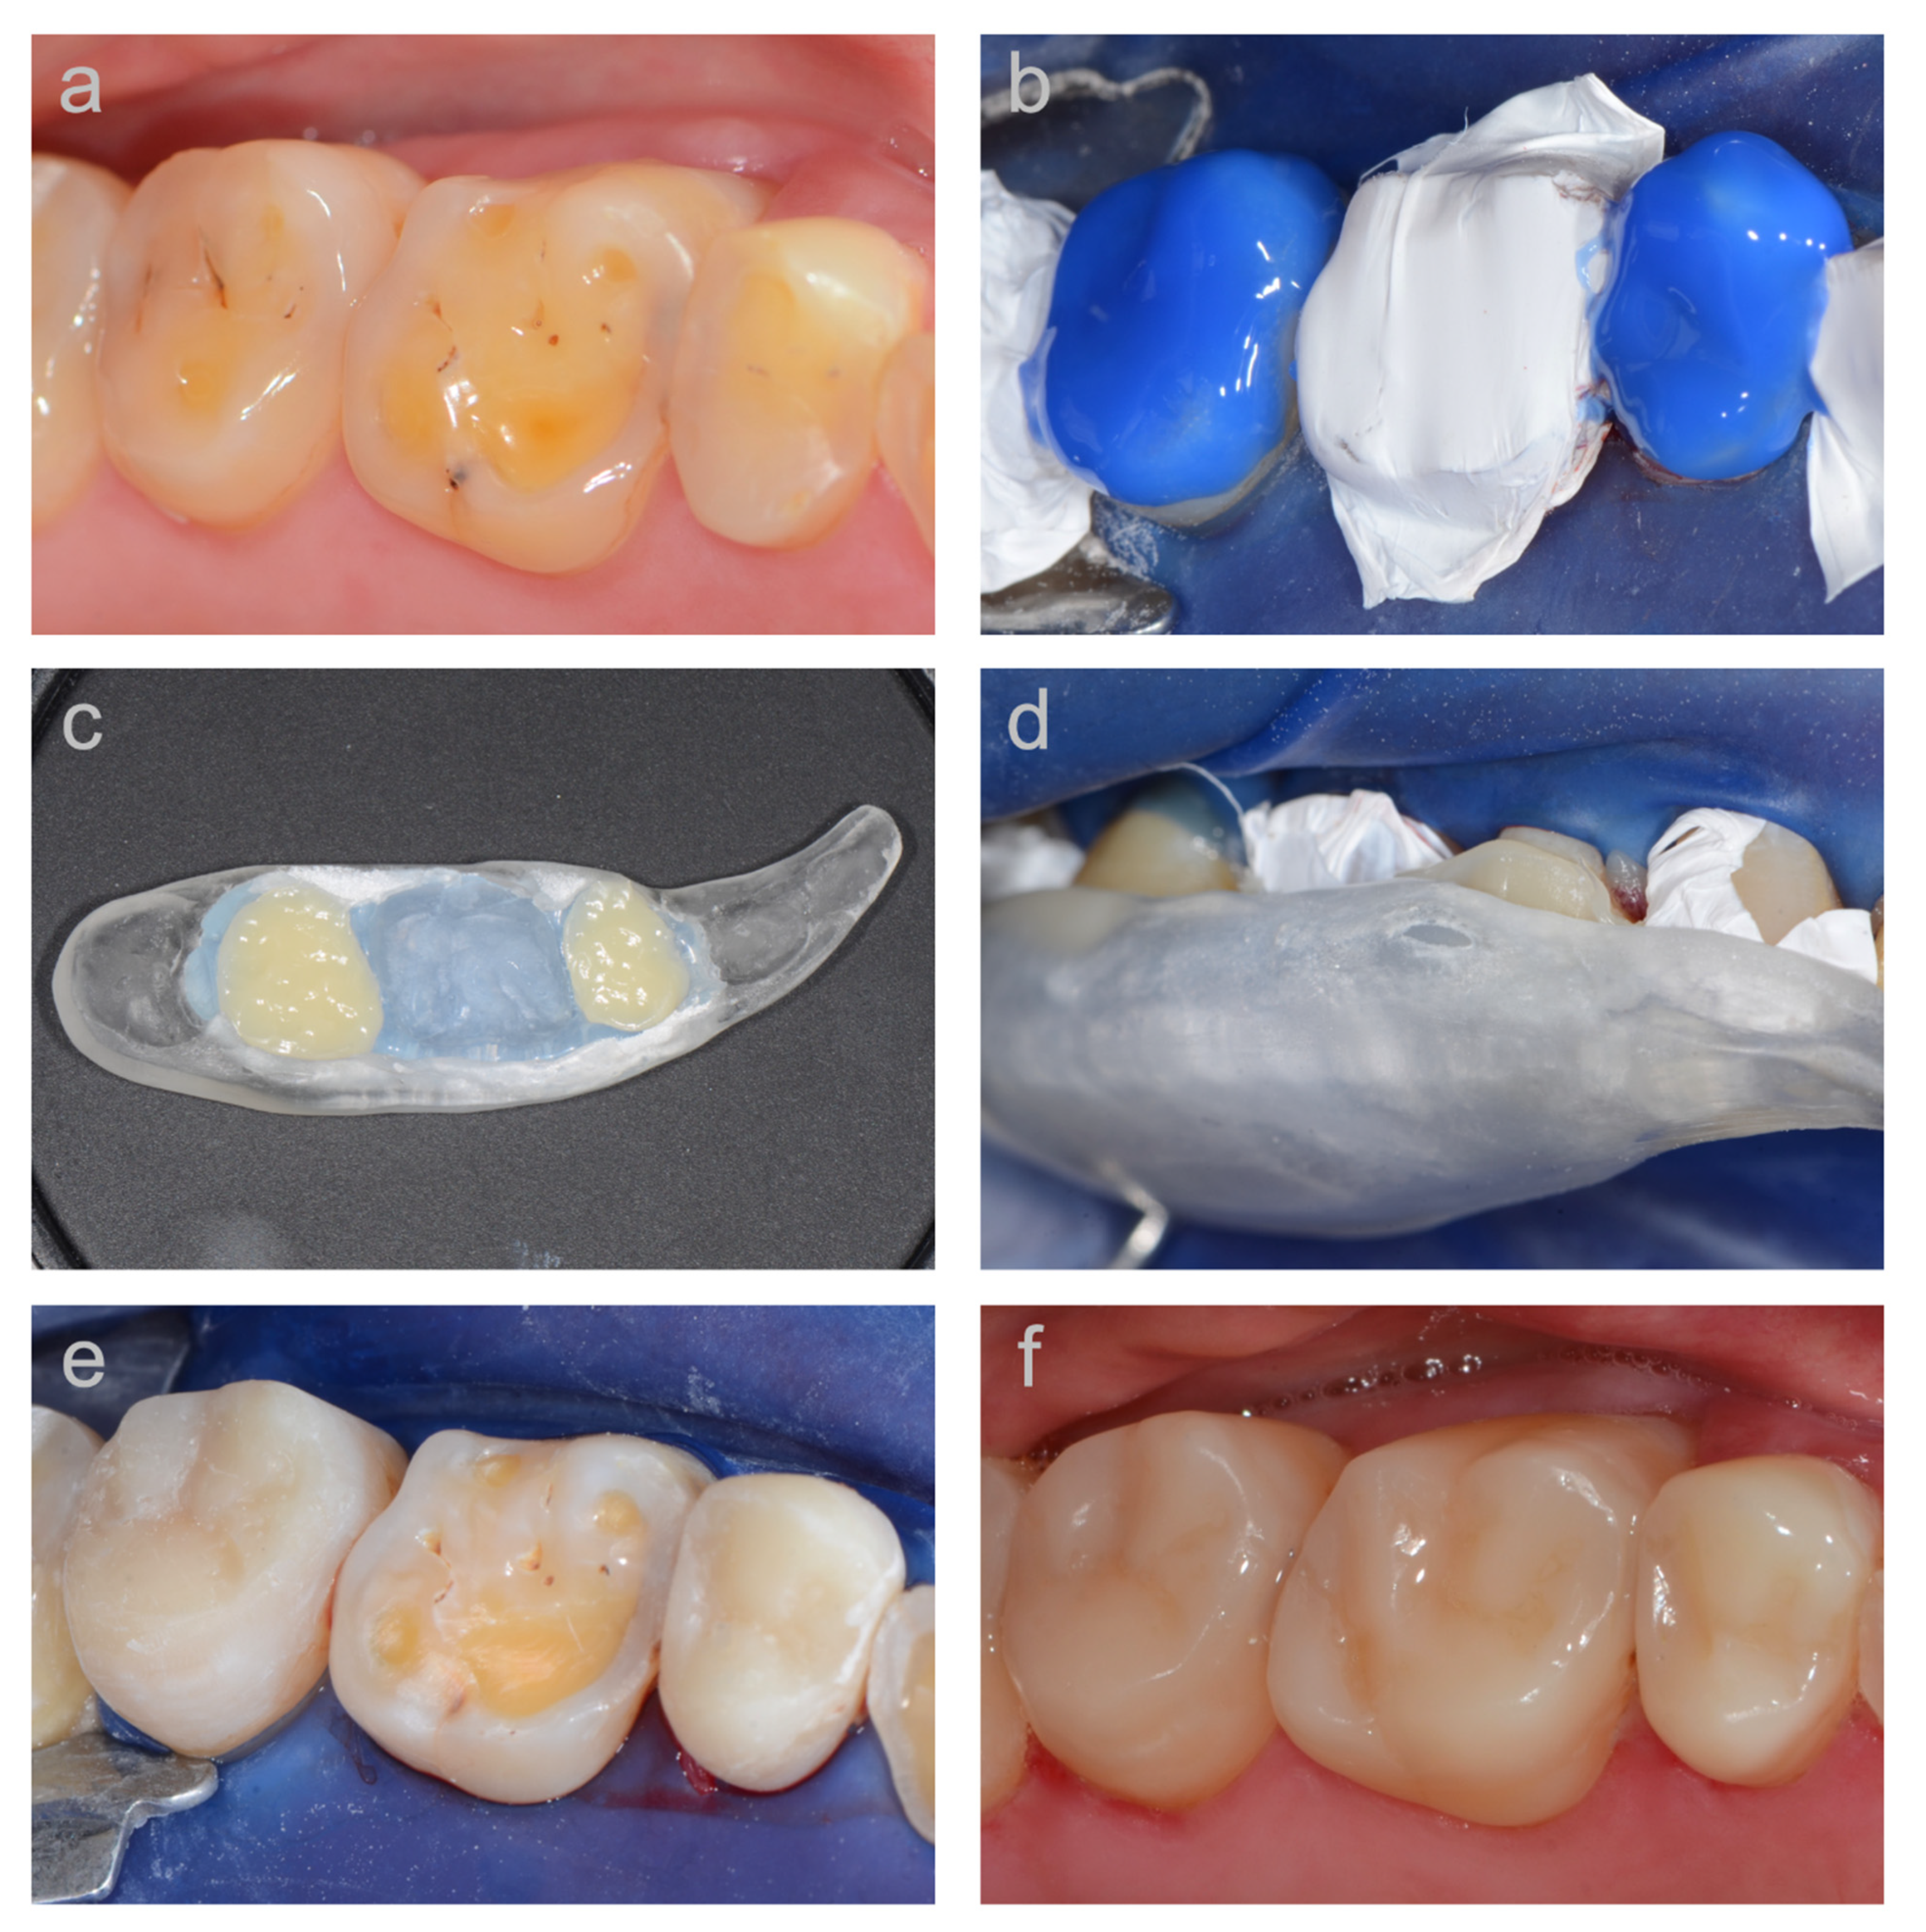 JCM | Free Full-Text | Vertical Bite Rehabilitation of Severely Worn  Dentitions with Direct Composite Restorations: Clinical Performance up to  11 Years | HTML